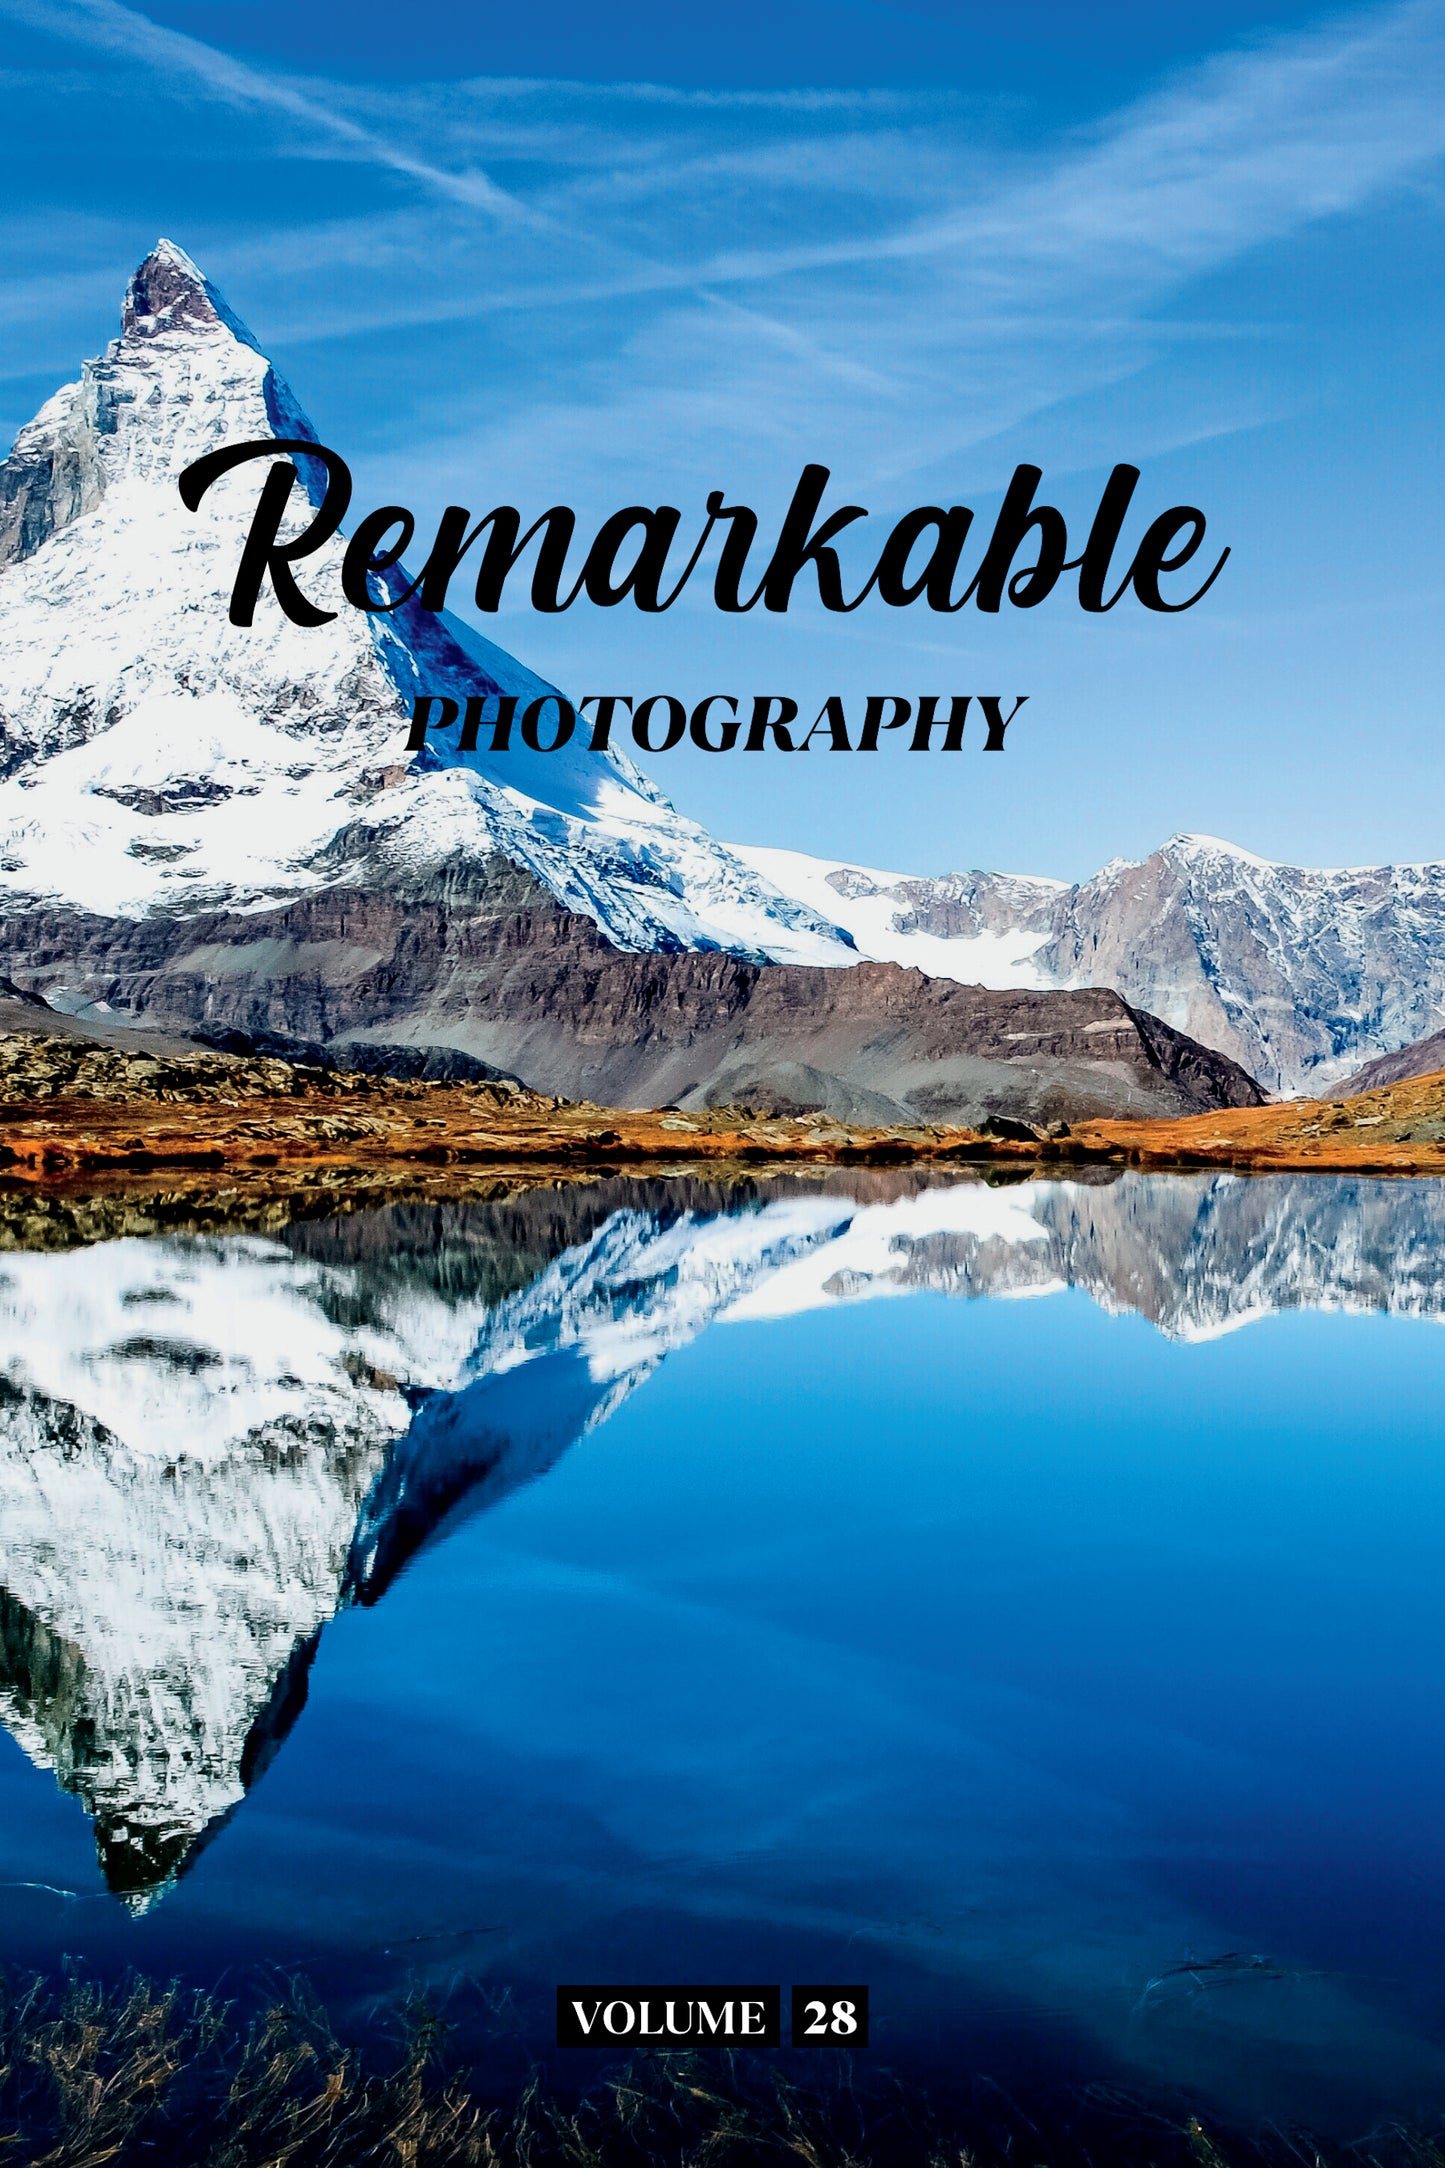 Remarkable Photography Volume 28 (Physical Book Pre-Order)